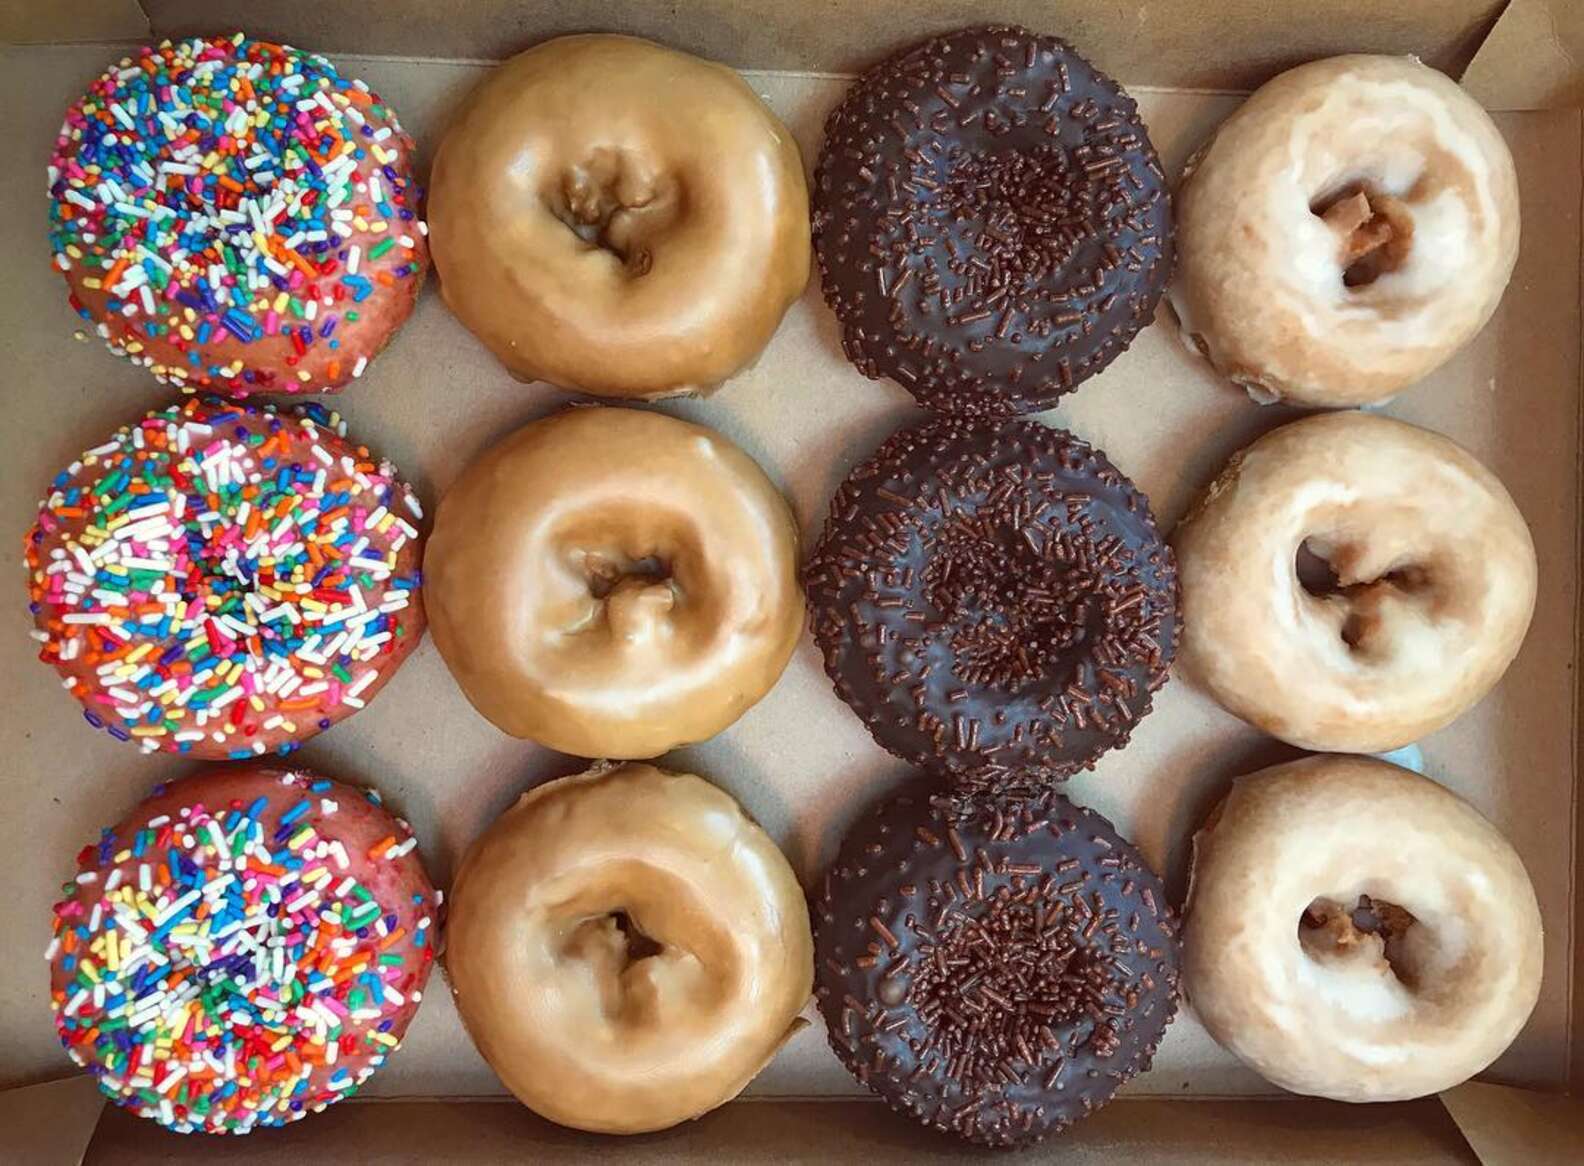 Best Donut Shops in America Where to Find the Best Donuts Right Now